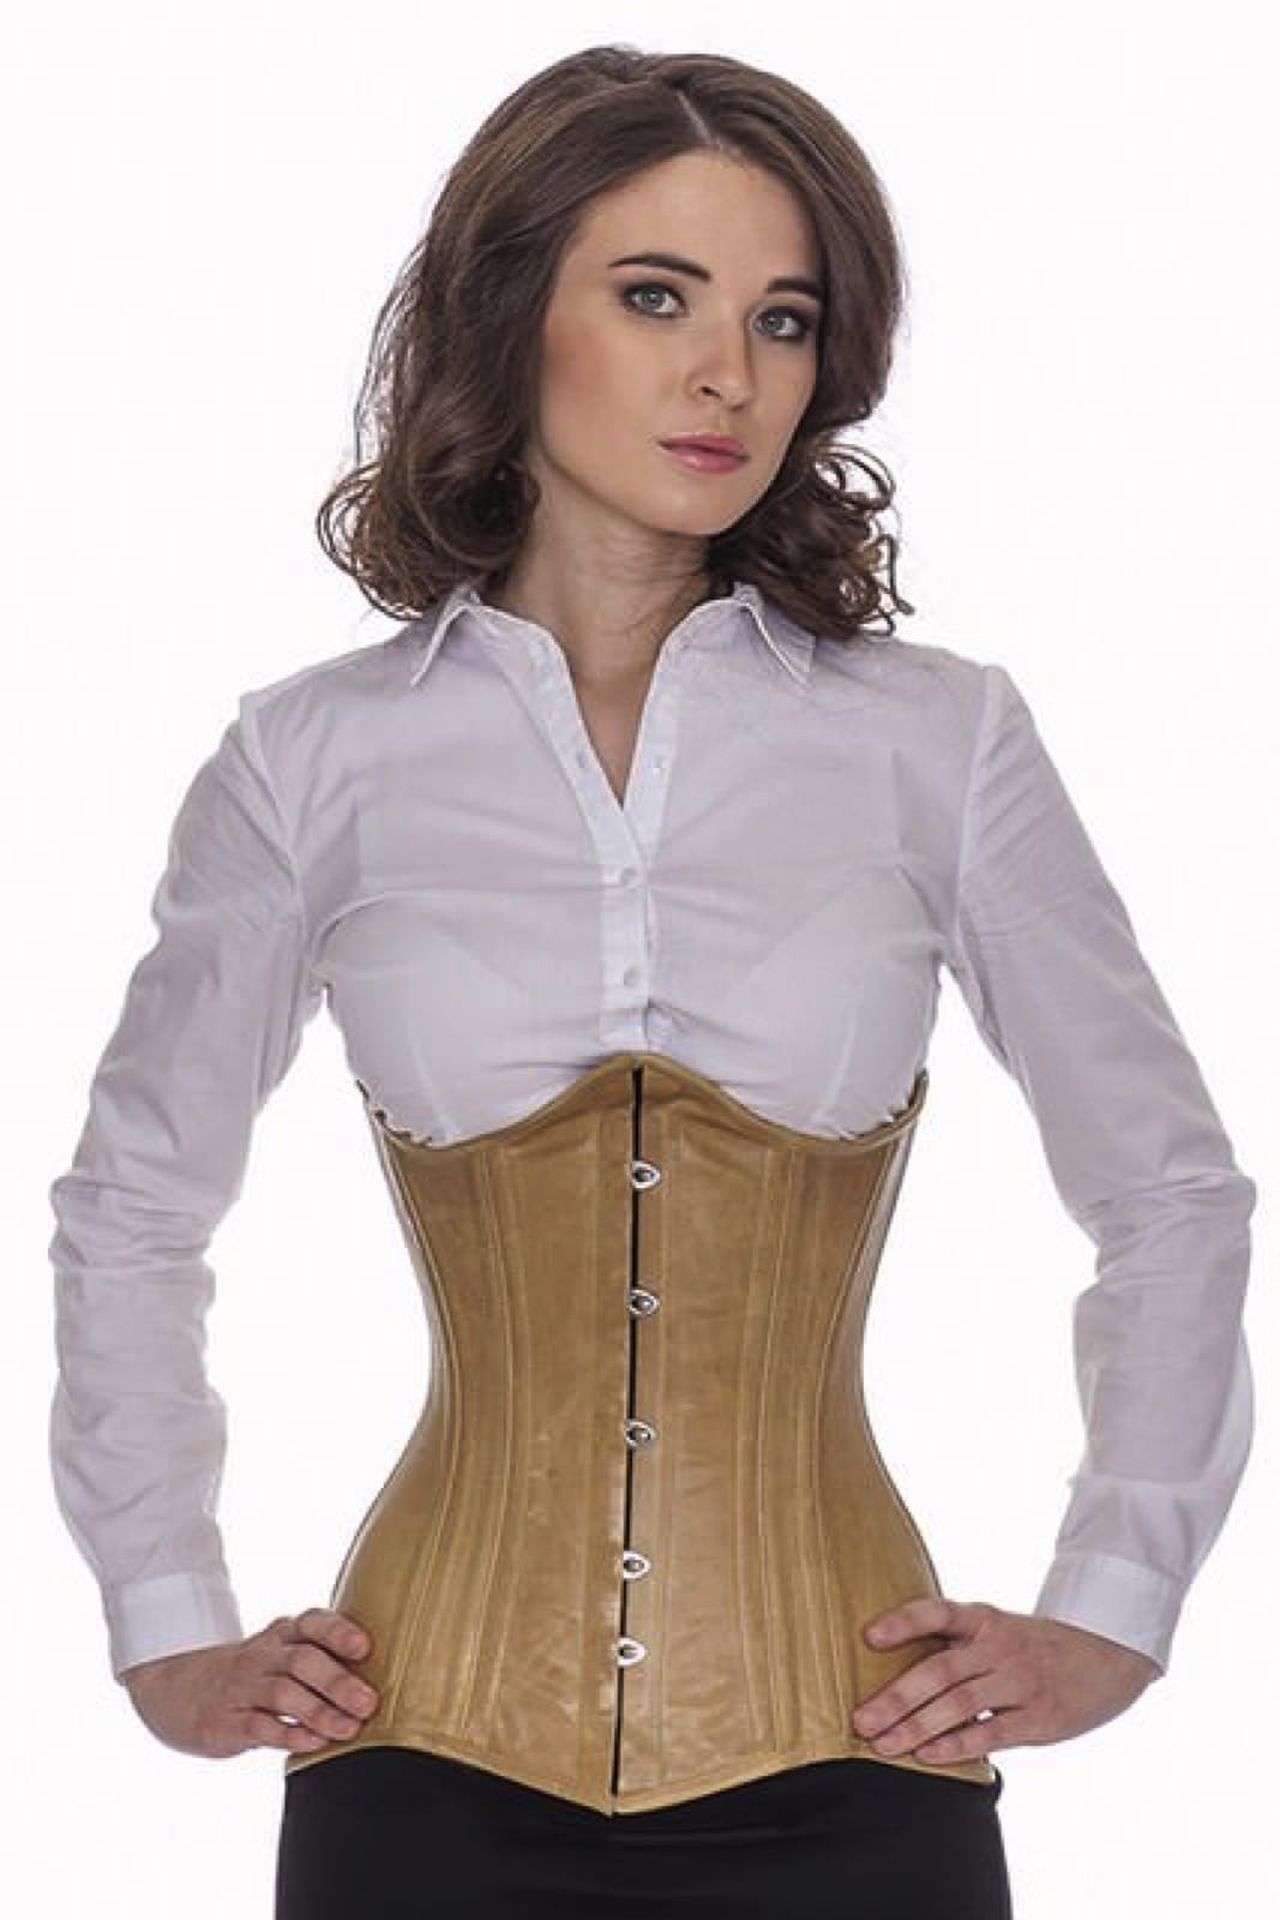 Corset beige leather curved underbust ln38